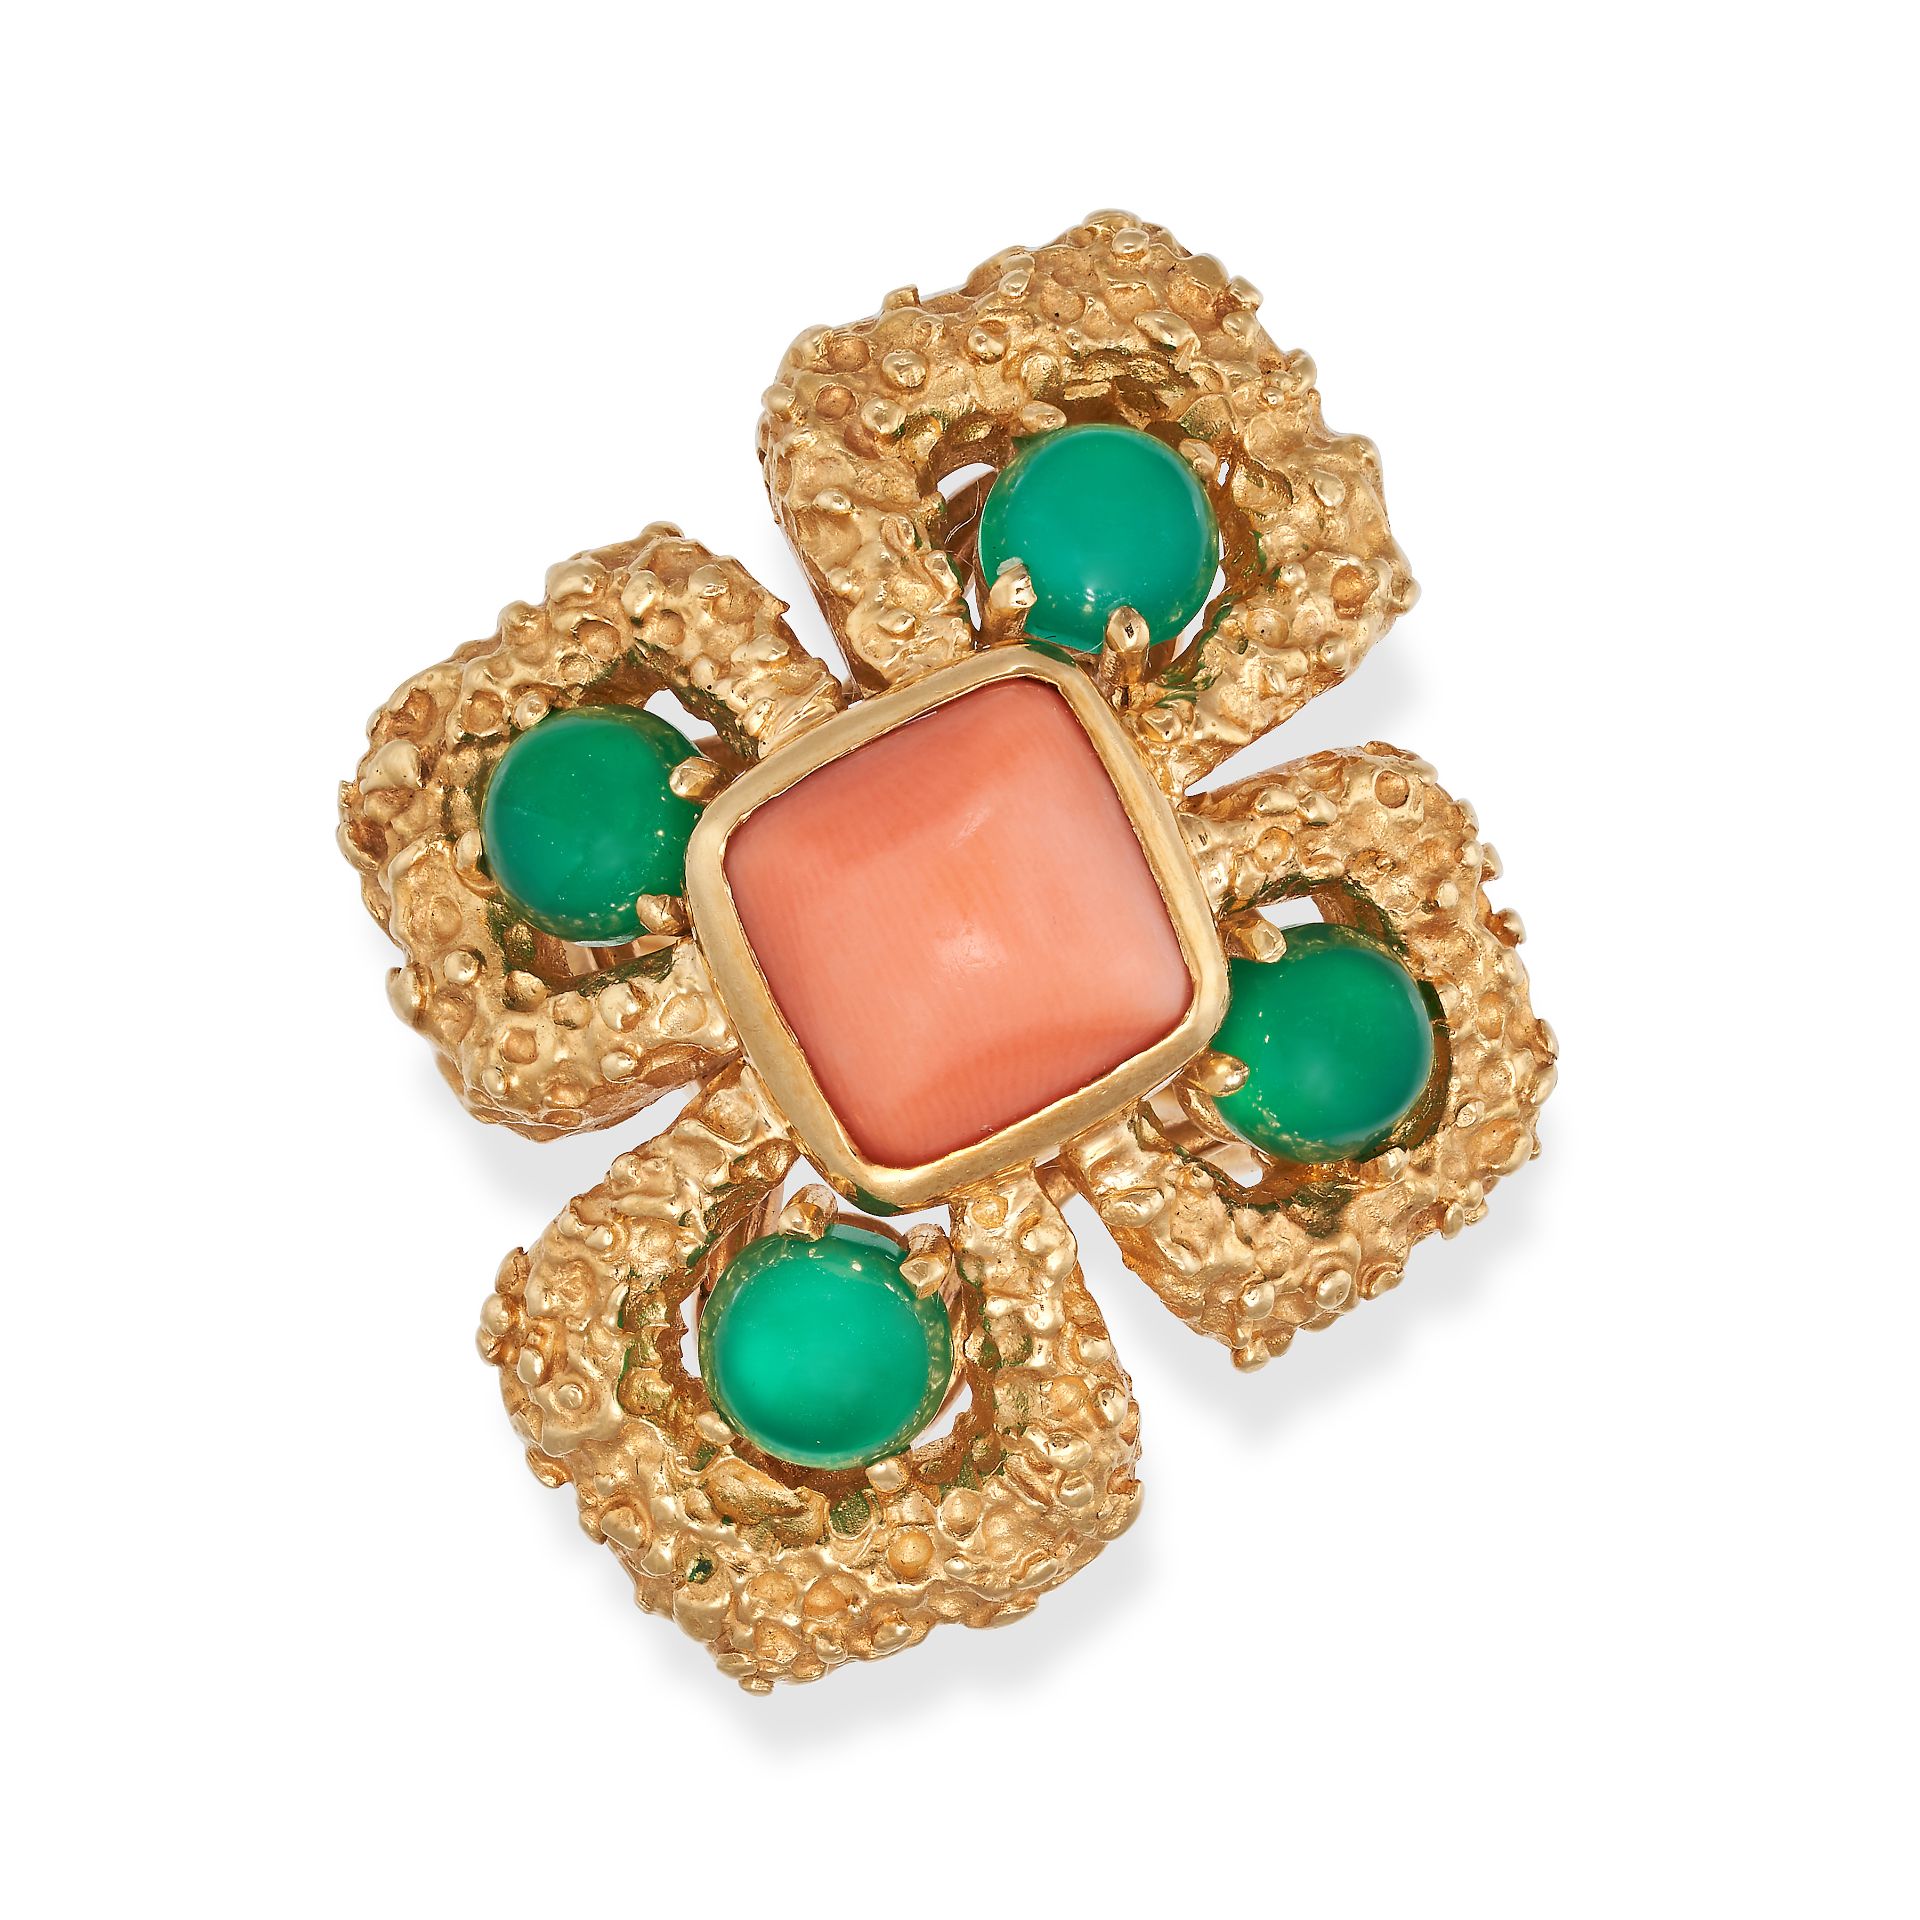 VAN CLEEF & ARPELS, A COLLECTION OF FRENCH CORAL AND CHRYSOPRASE VAN CLEEF & ARPELS JEWELLERY in ... - Bild 6 aus 8